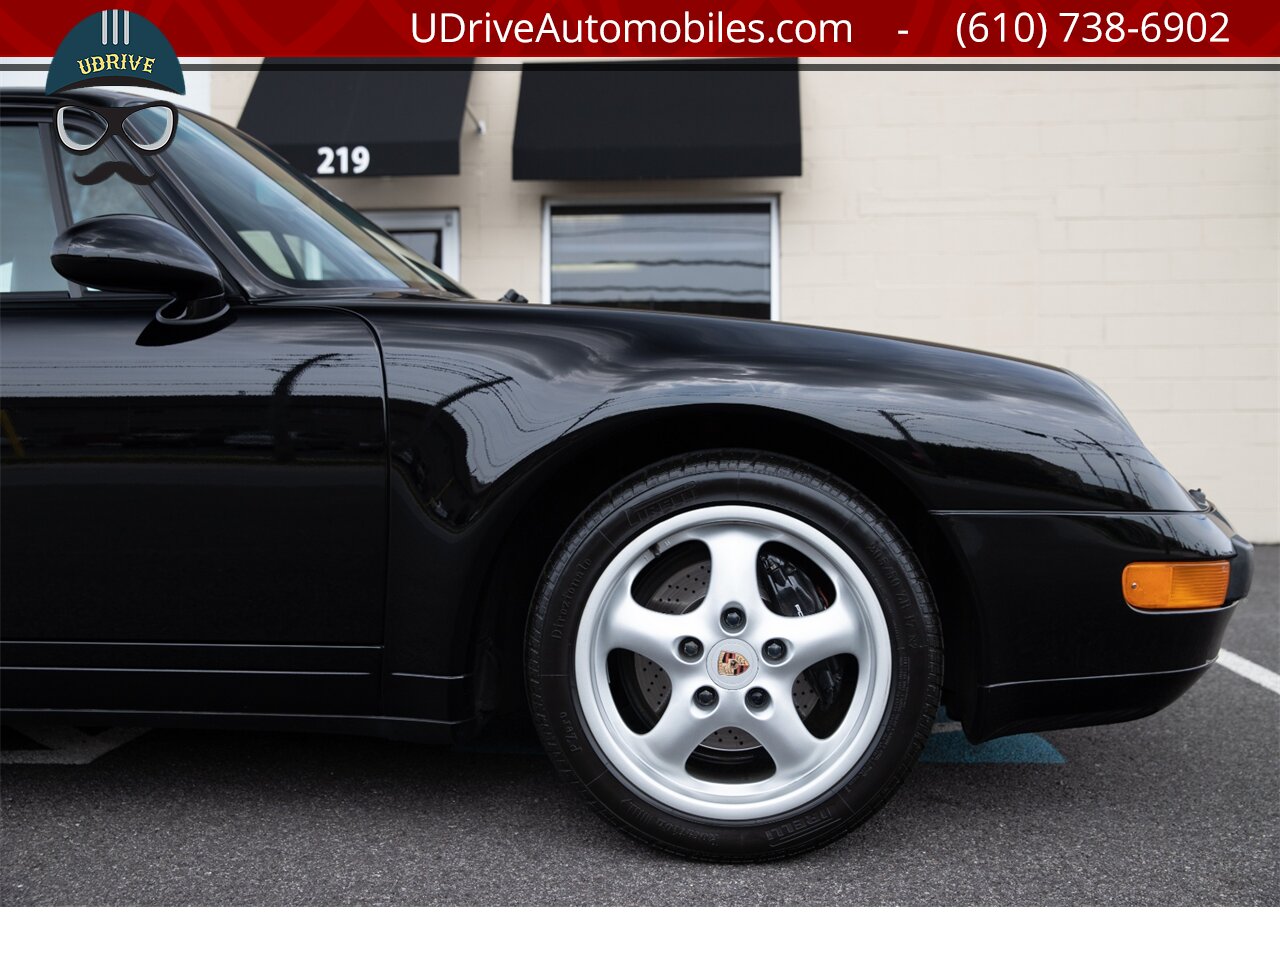 1995 Porsche 911 993 Carrera 6 Speed 16k Miles Service History  Black over Black Spectacular Stock Example 1 Owner Clean Carfax - Photo 14 - West Chester, PA 19382